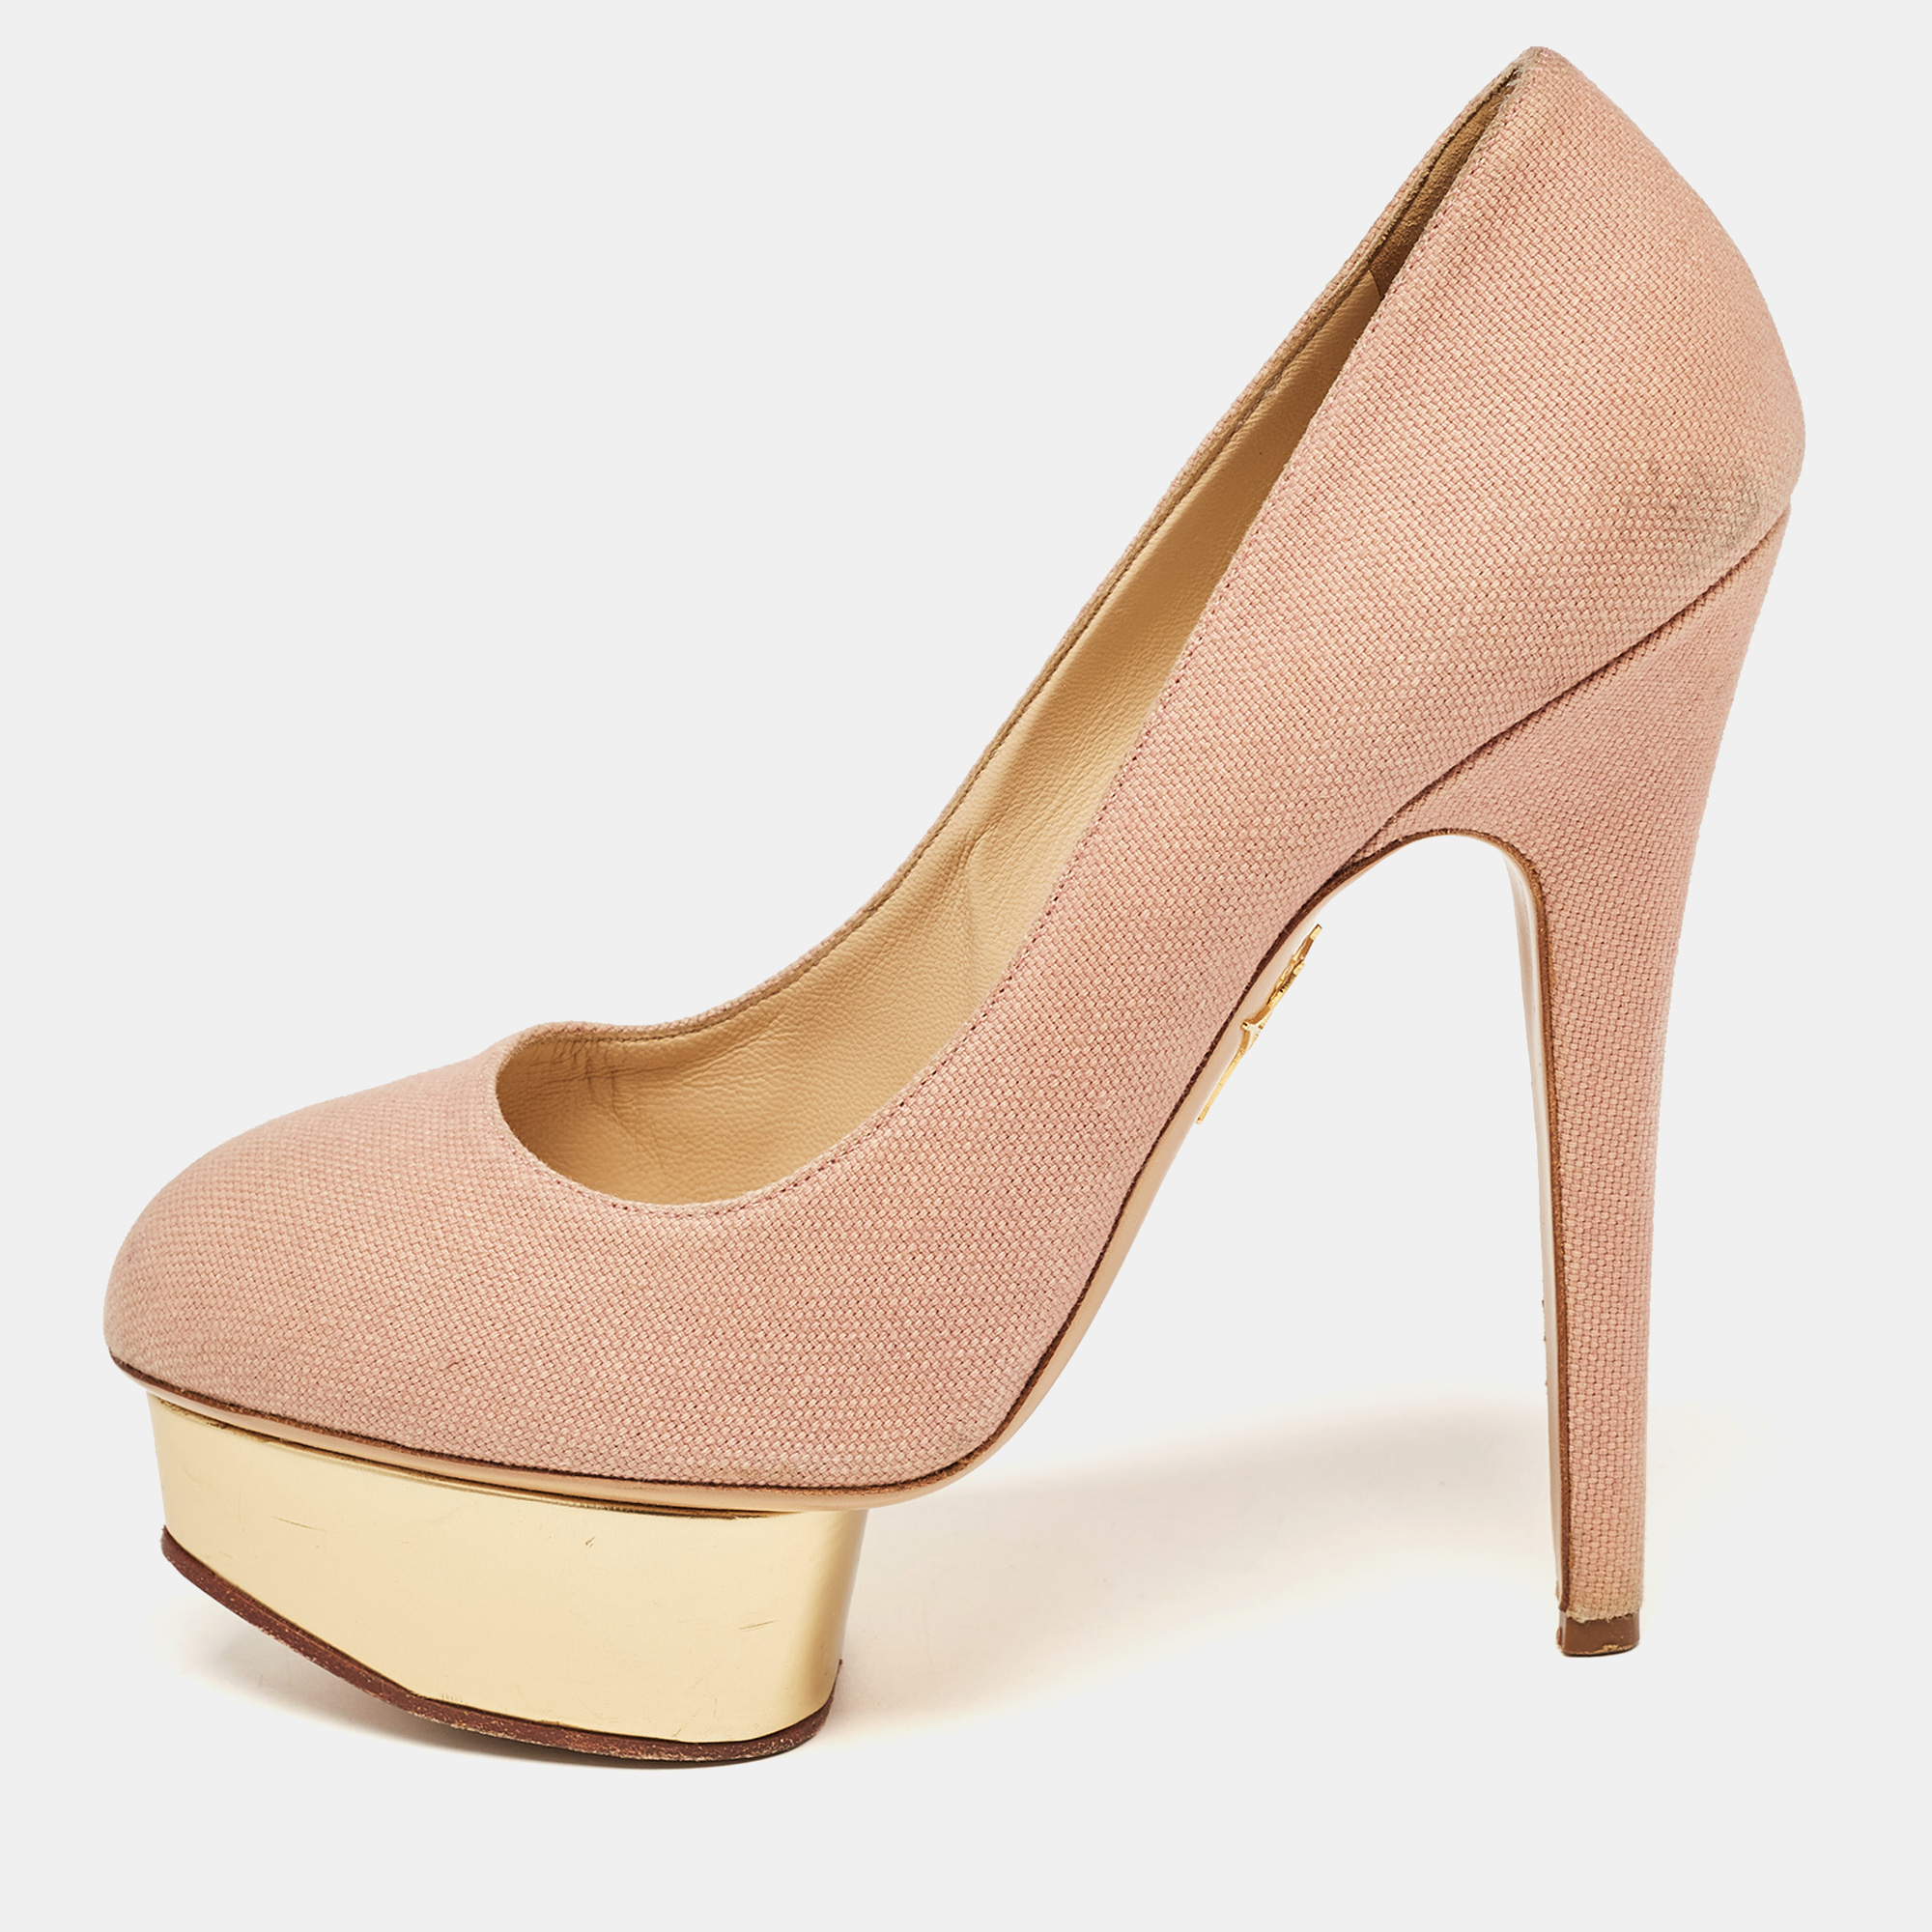 Charlotte Olympia Pink Canvas Dolly Platform Pumps Size 38